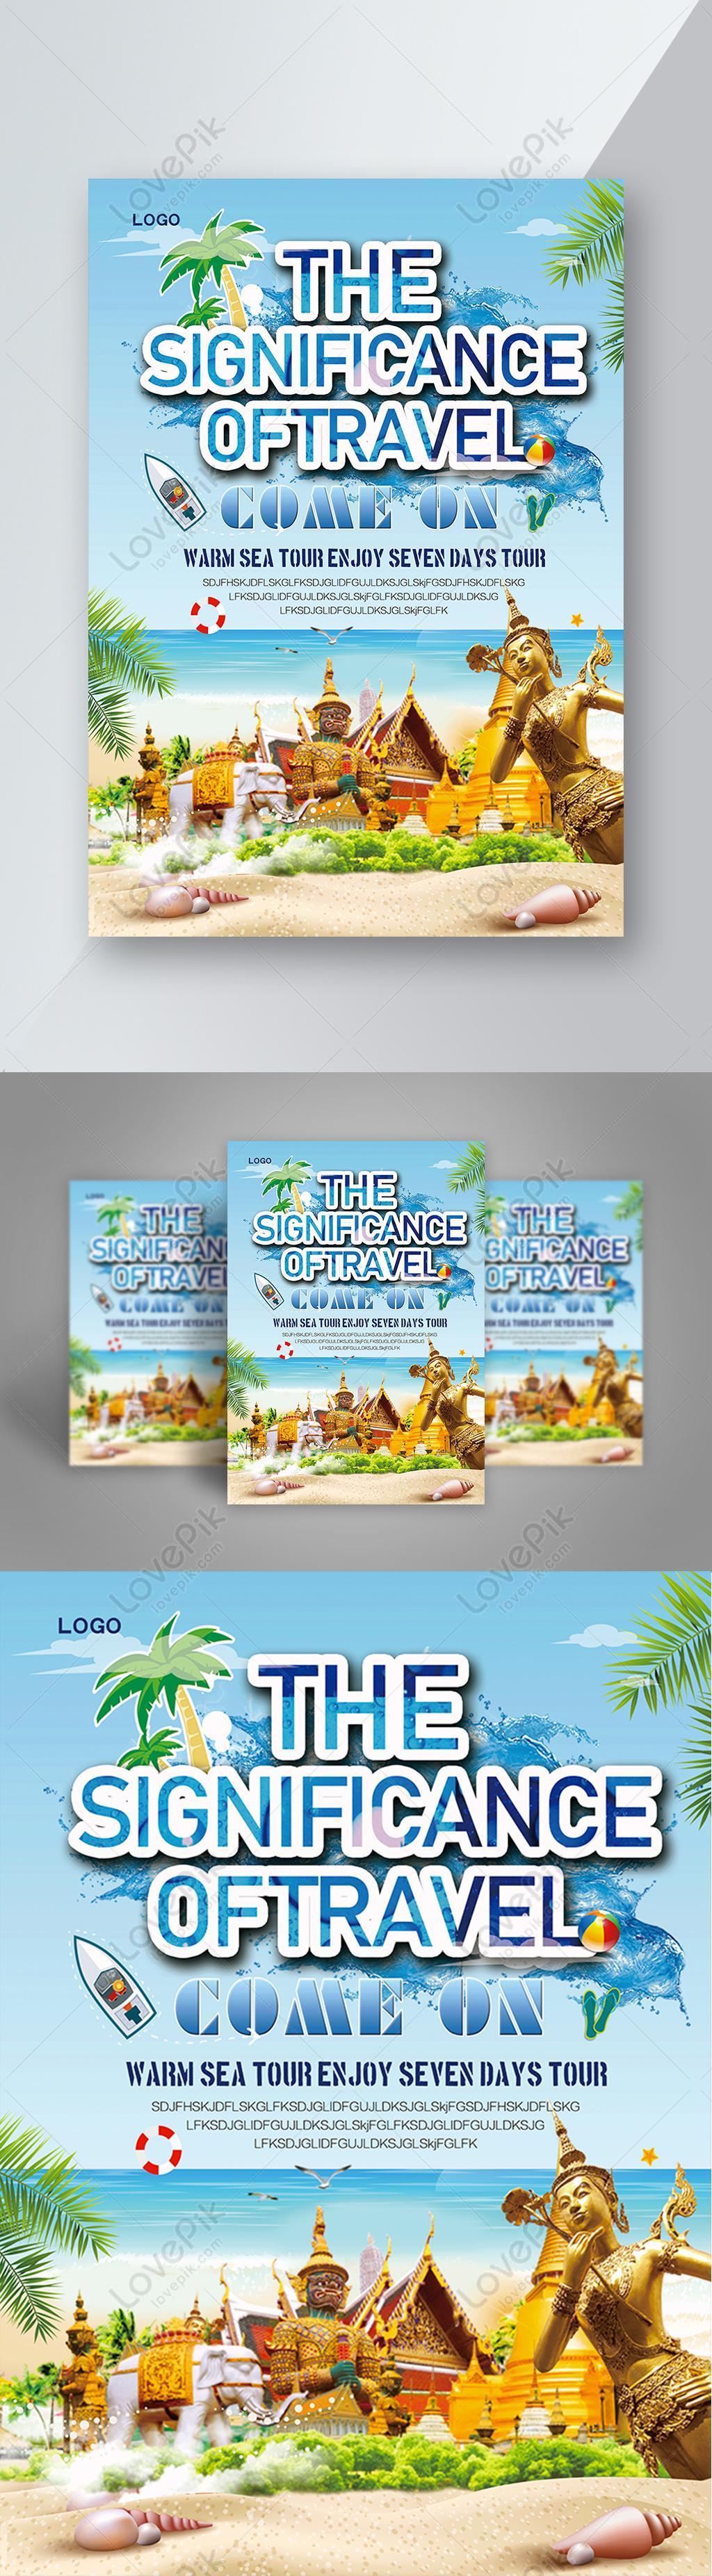 Thai tourist leaflet template image_picture free download Regarding Vbs Flyer Template